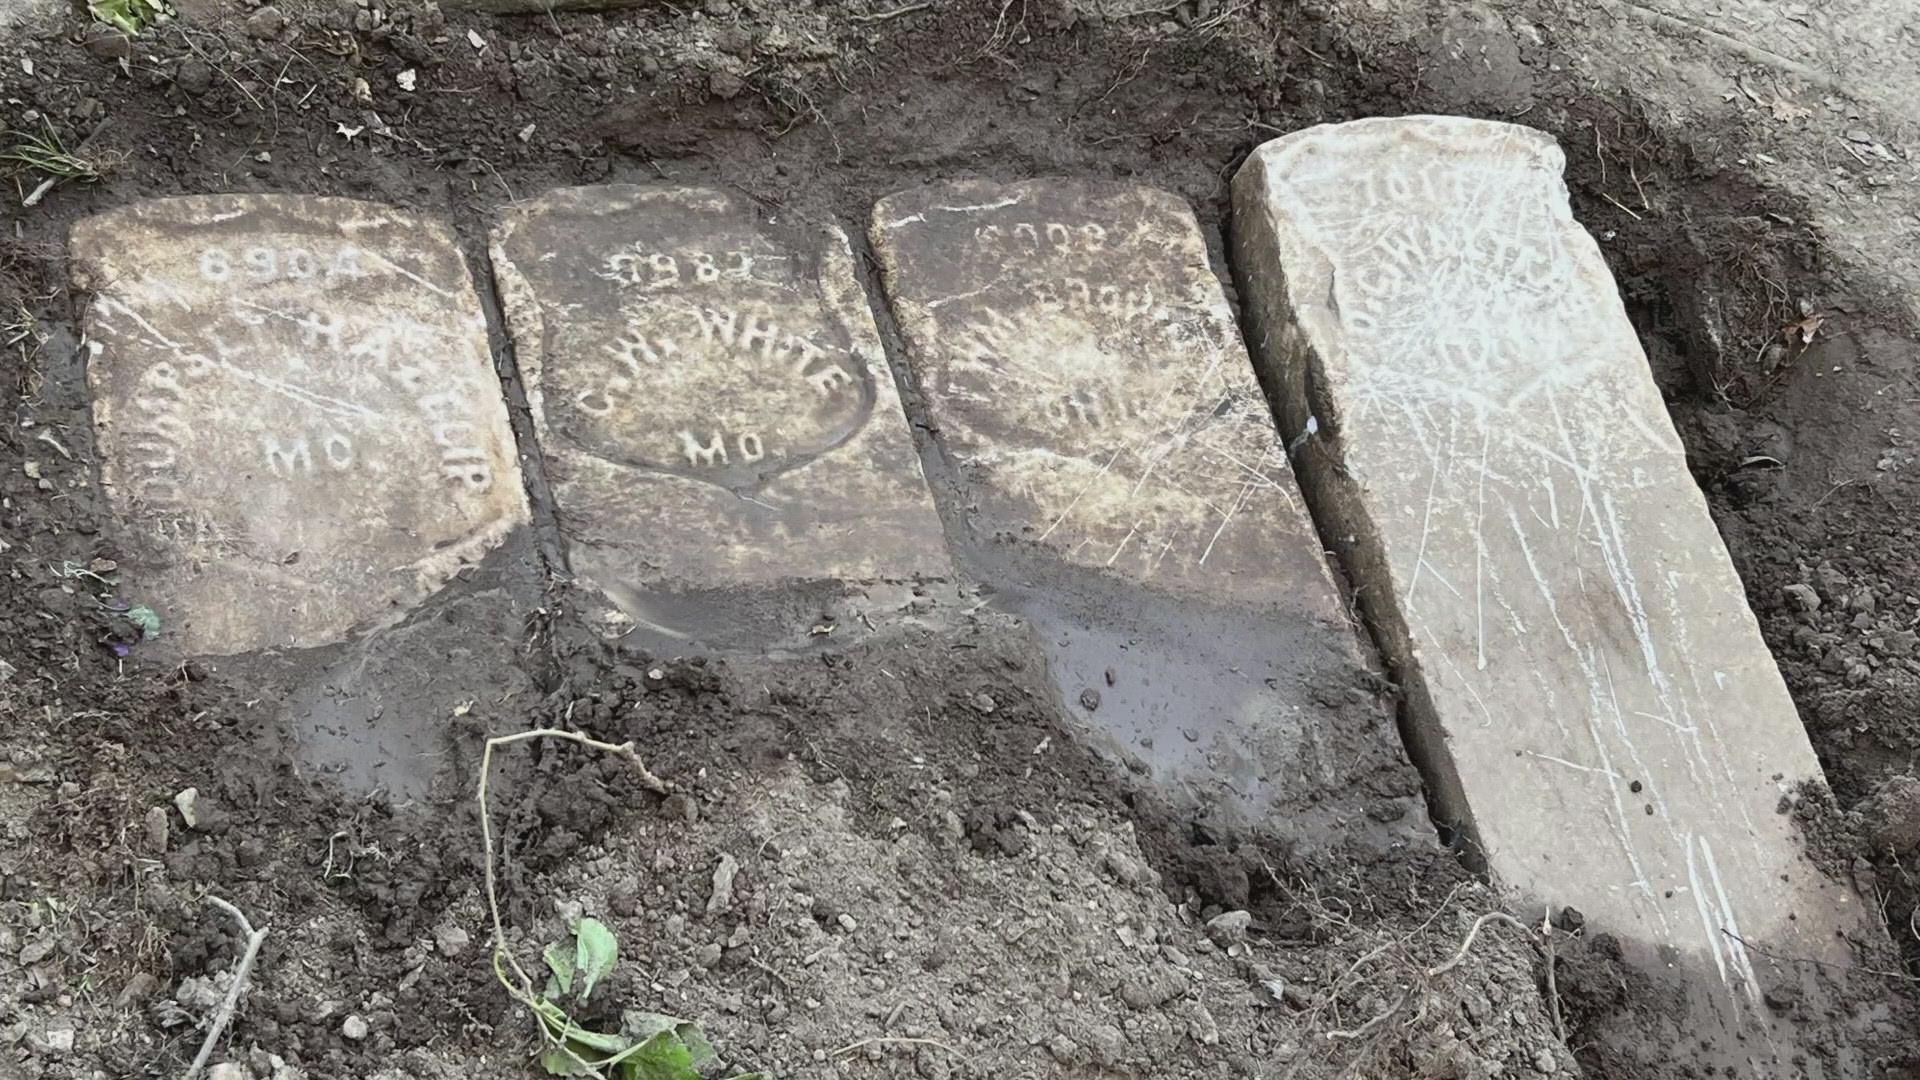 A Metro East woman says a new addition to her home led her to a haunting discovery. Workers found the headstones of several Civil War veterans buried in her backyard